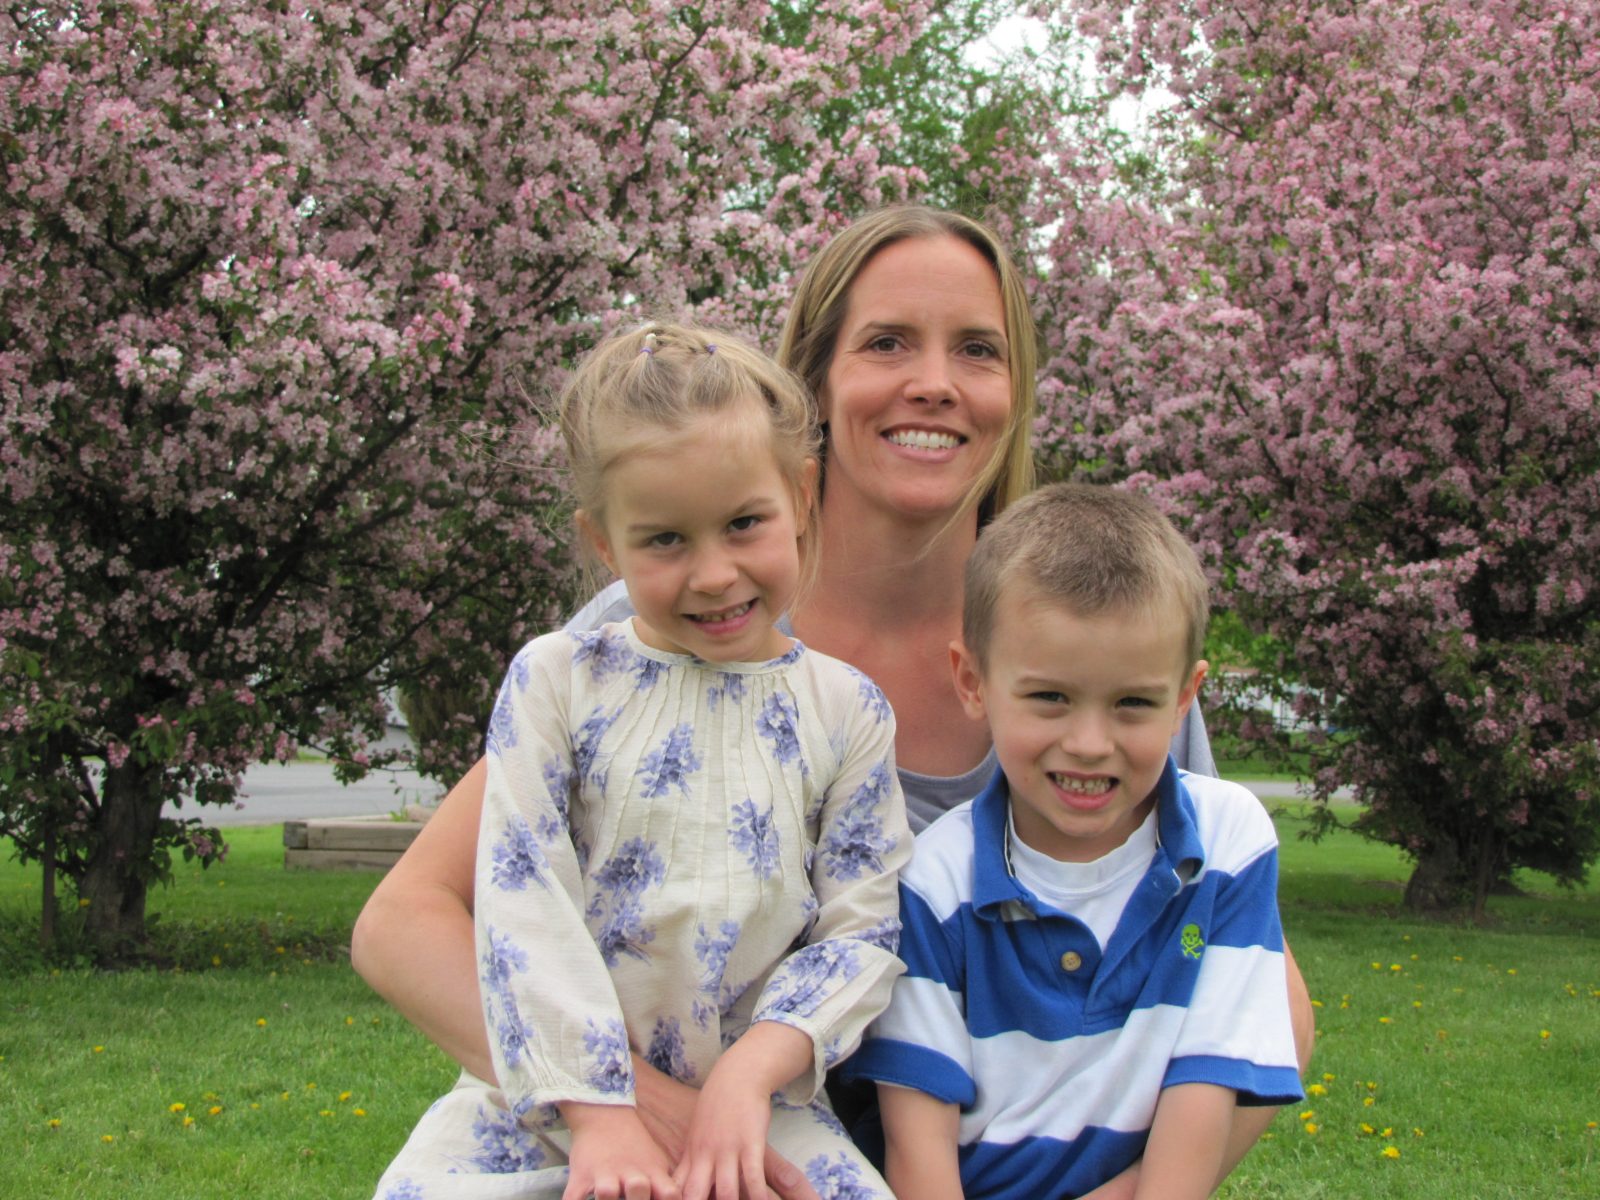 HEART TO HEART: Mother of youngster with heart defect rallies to support CHEO